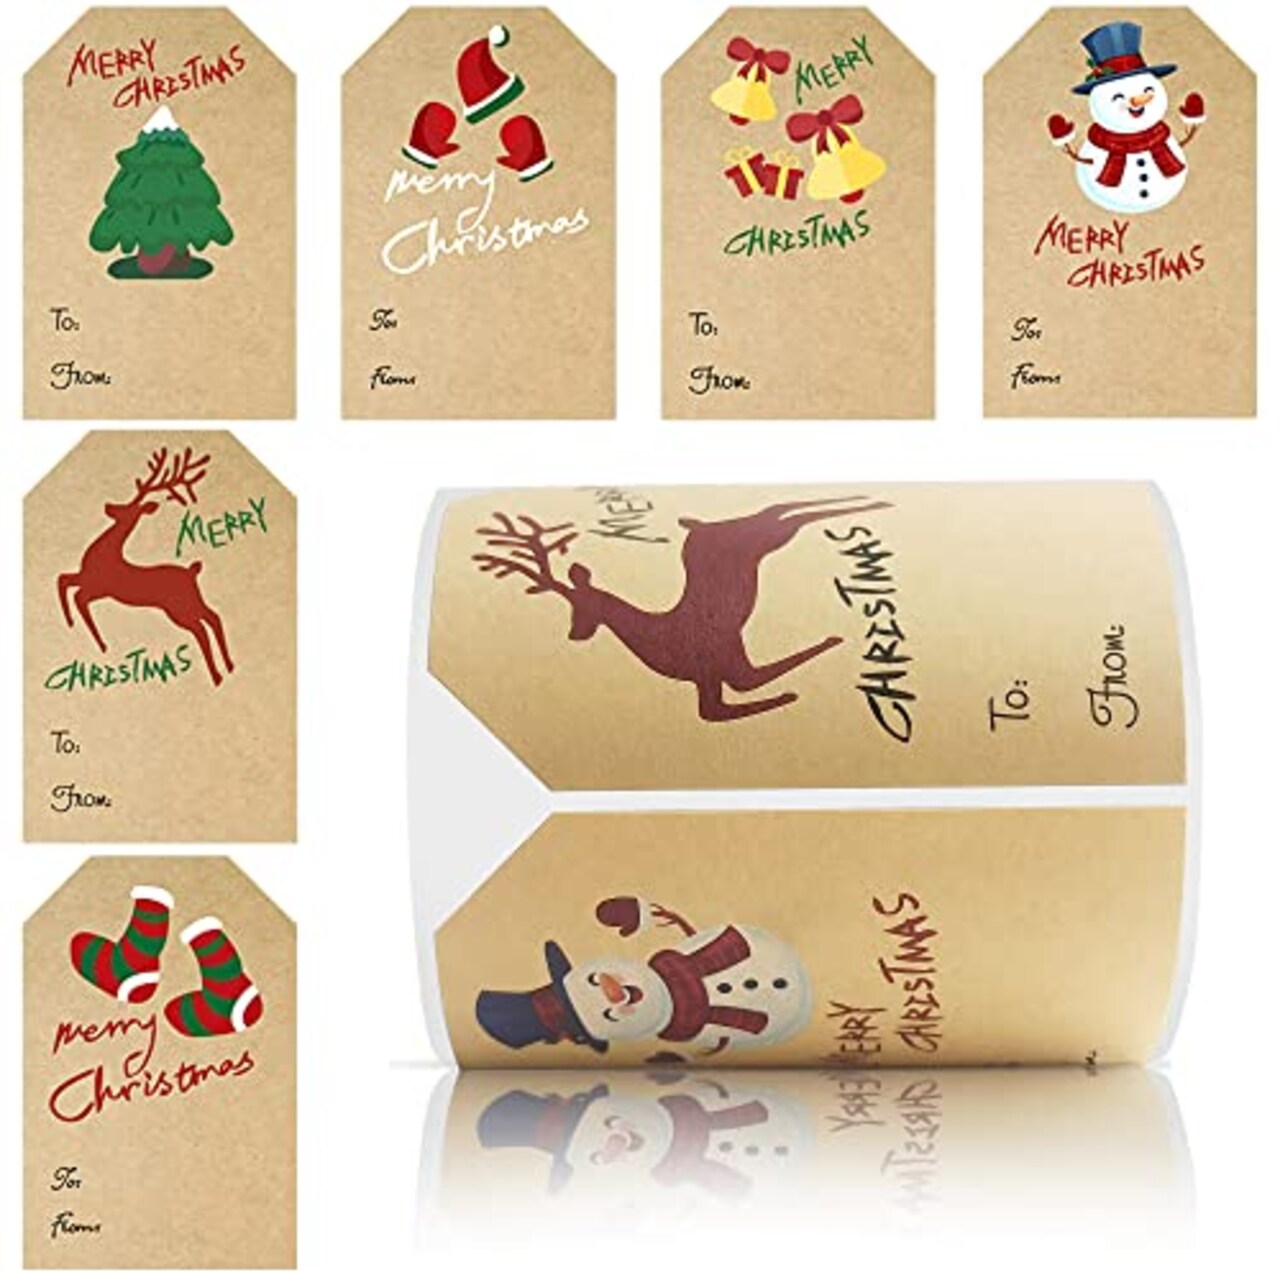 250 Pcs Christmas Gift Tags Self Adhesive Gift Tag Stickers - Decorative  Stickers for Holiday Presents & Packages -Gift Tags for Christmas Presents  - Convenient Dispenser Box 2 x 3 Inch